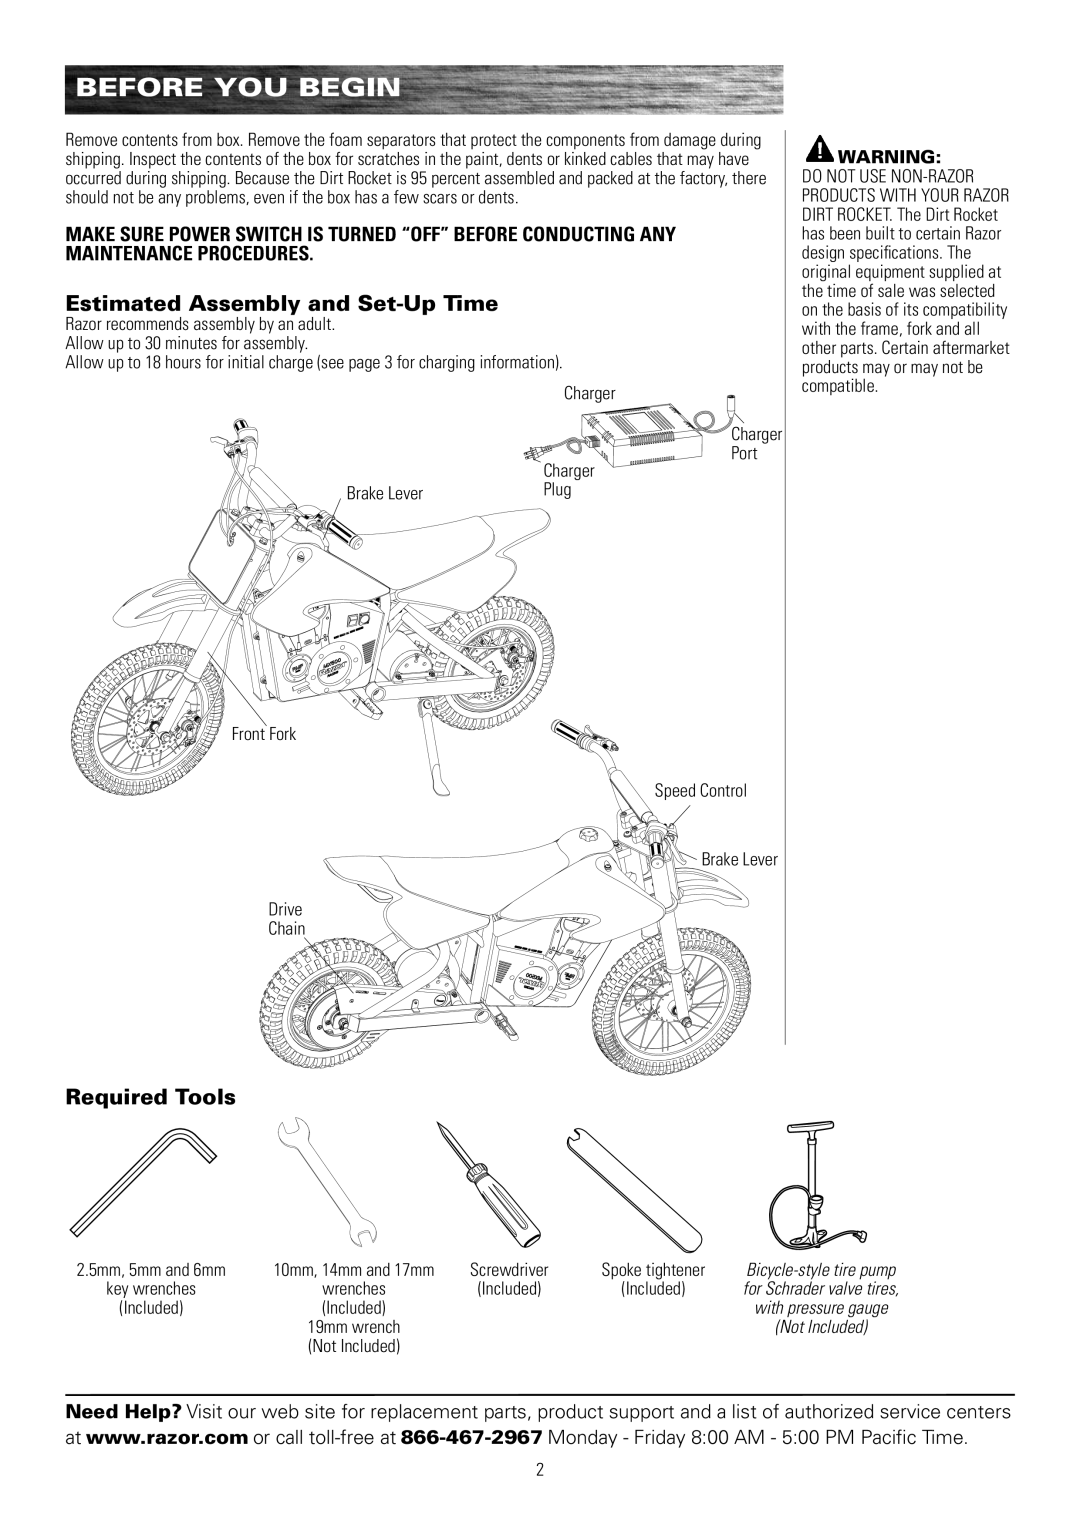 Razor MX650, MX500 owner manual Before You Begin, Estimated Assembly and Set-Up Time, Required Tools 